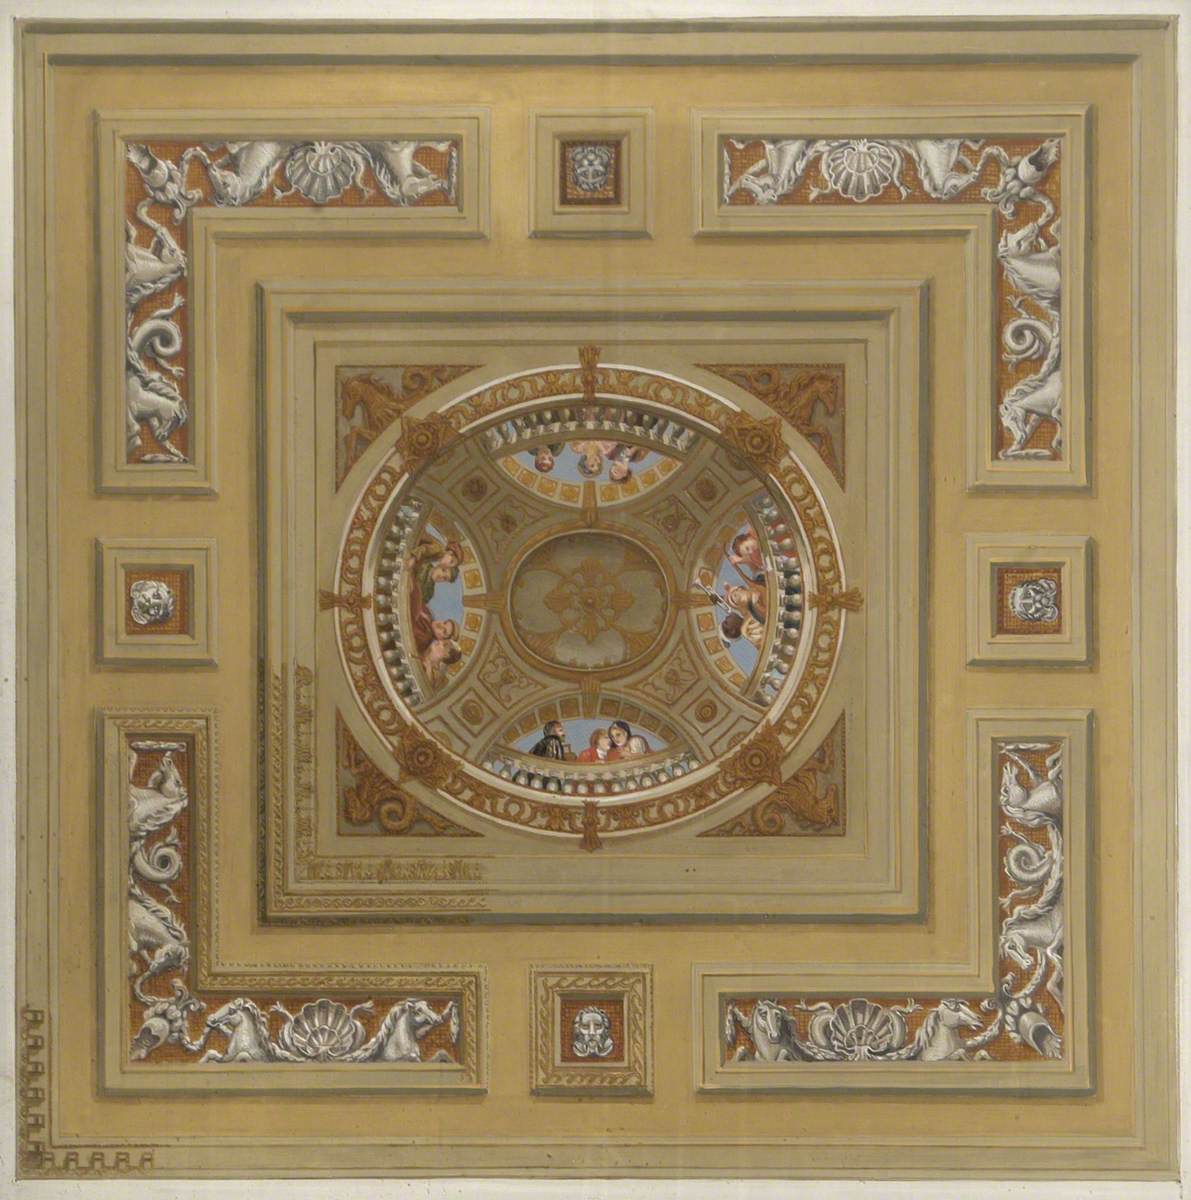 Ceiling Panel, King's Grand Stairs, Kensington Palace